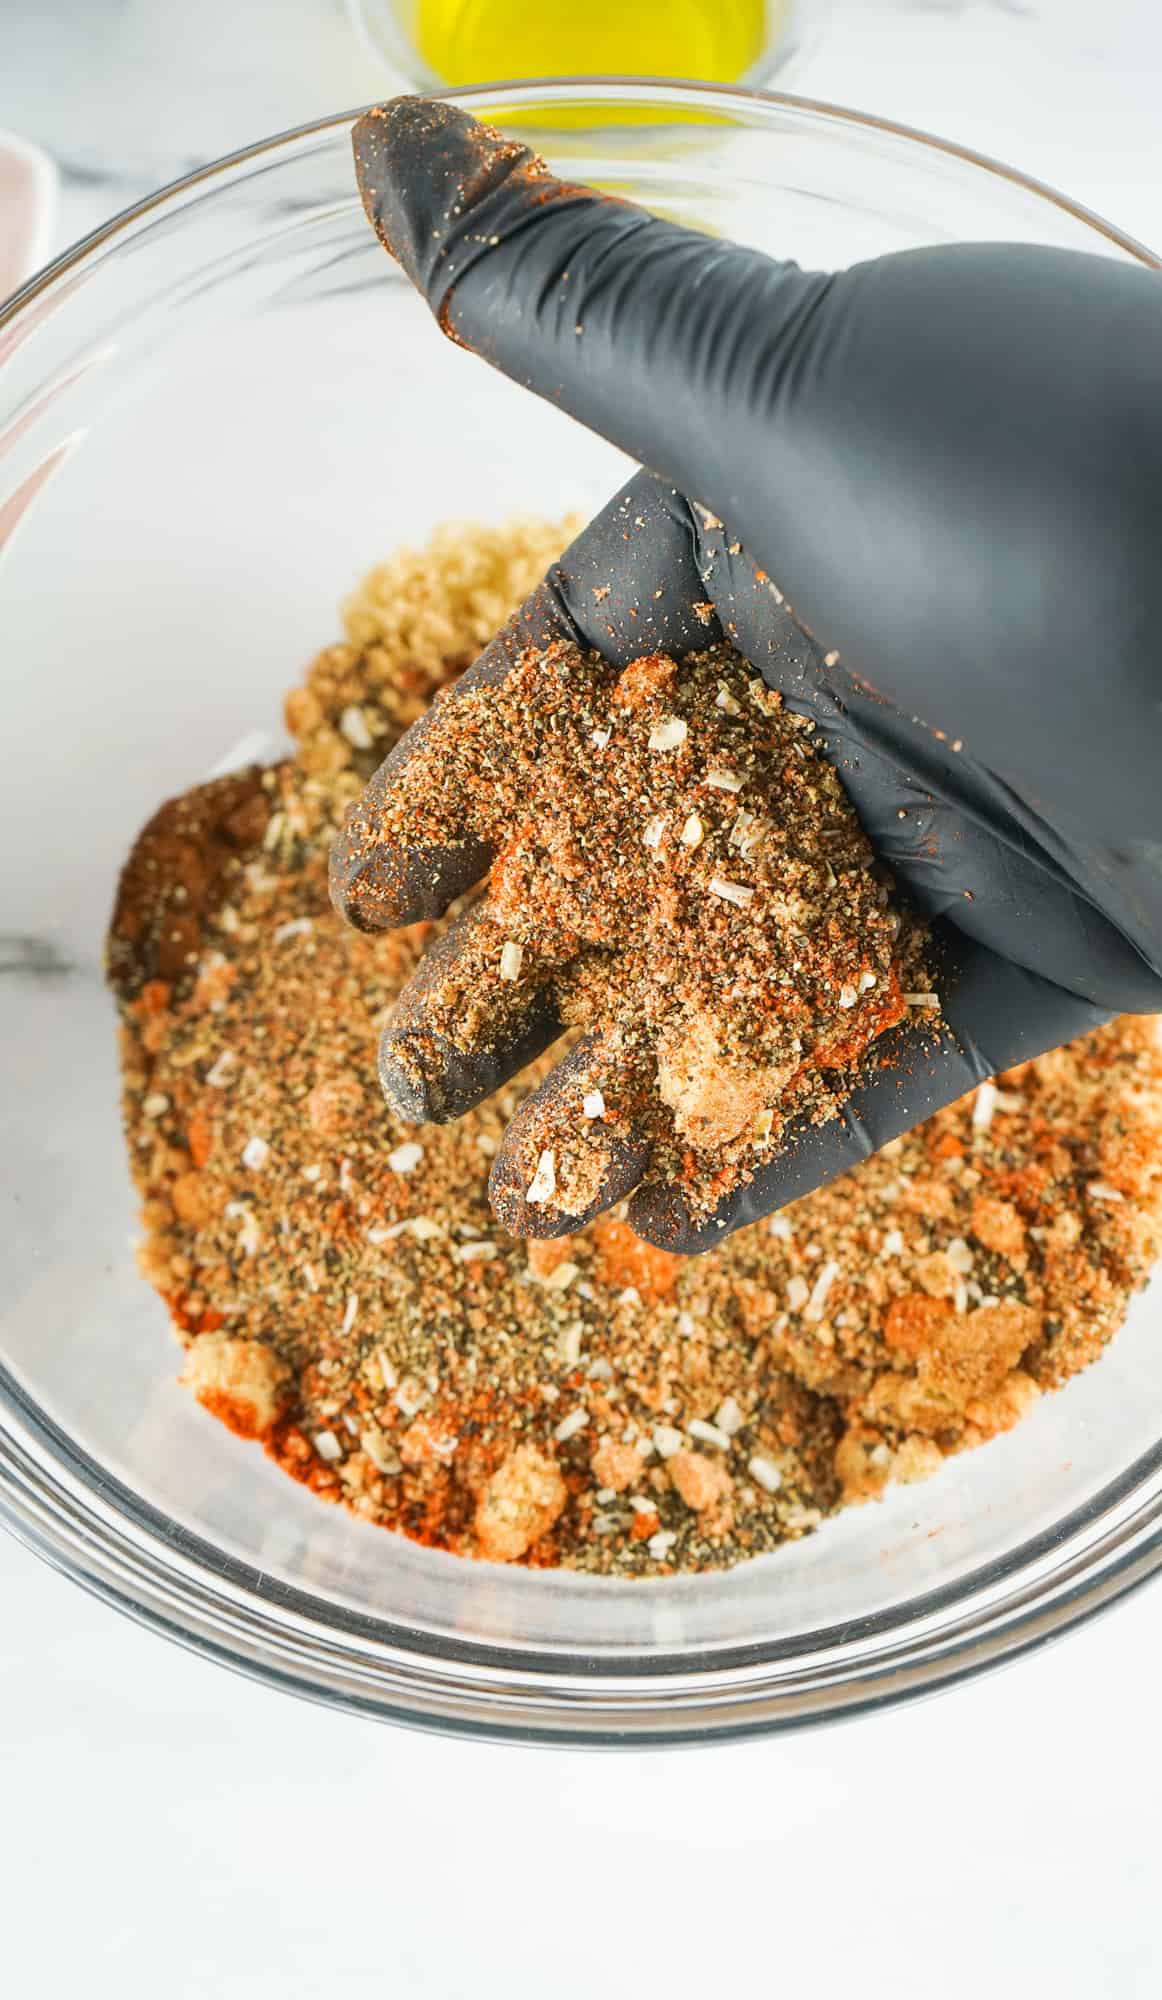 Pork butt seasoning mixture mixed with gloved hand in a bowl